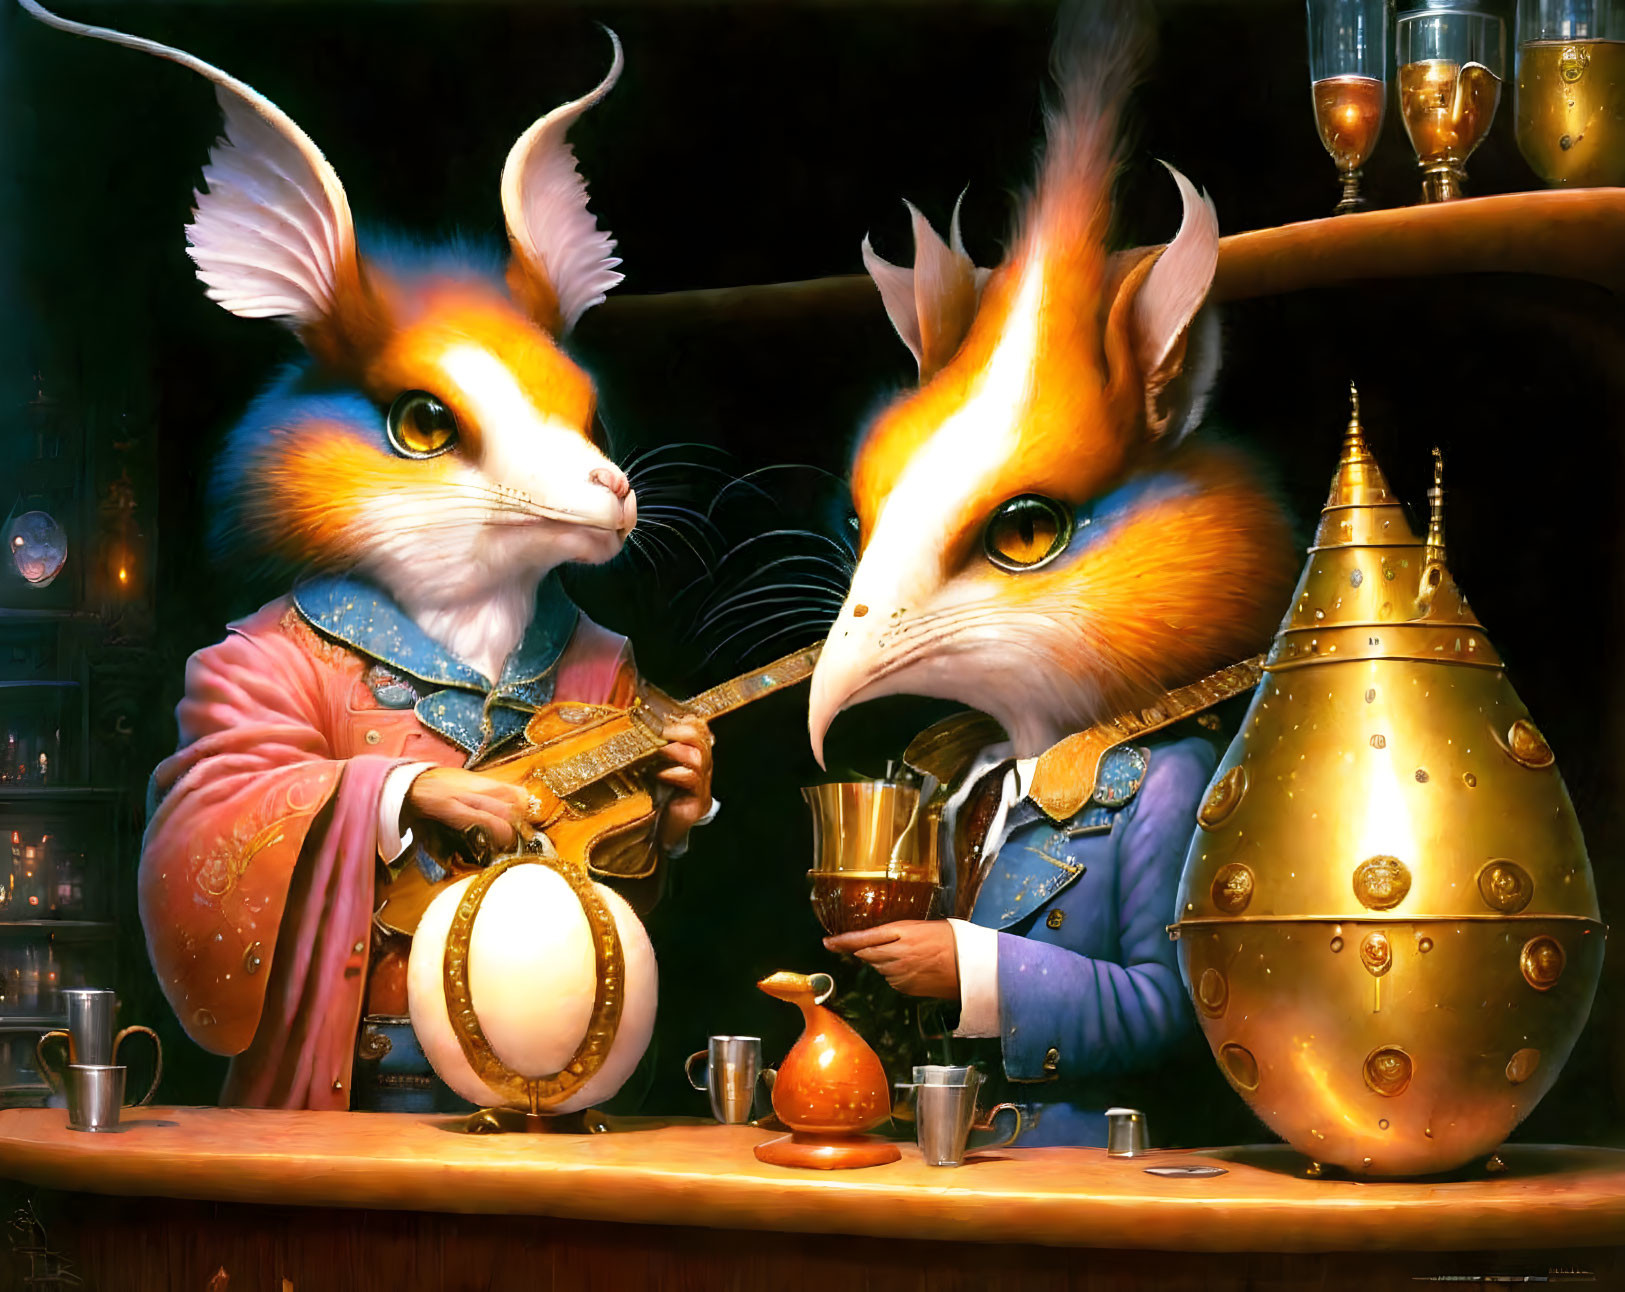 Anthropomorphic foxes in elegant attire having tea with lute, surrounded by luxury items and golden